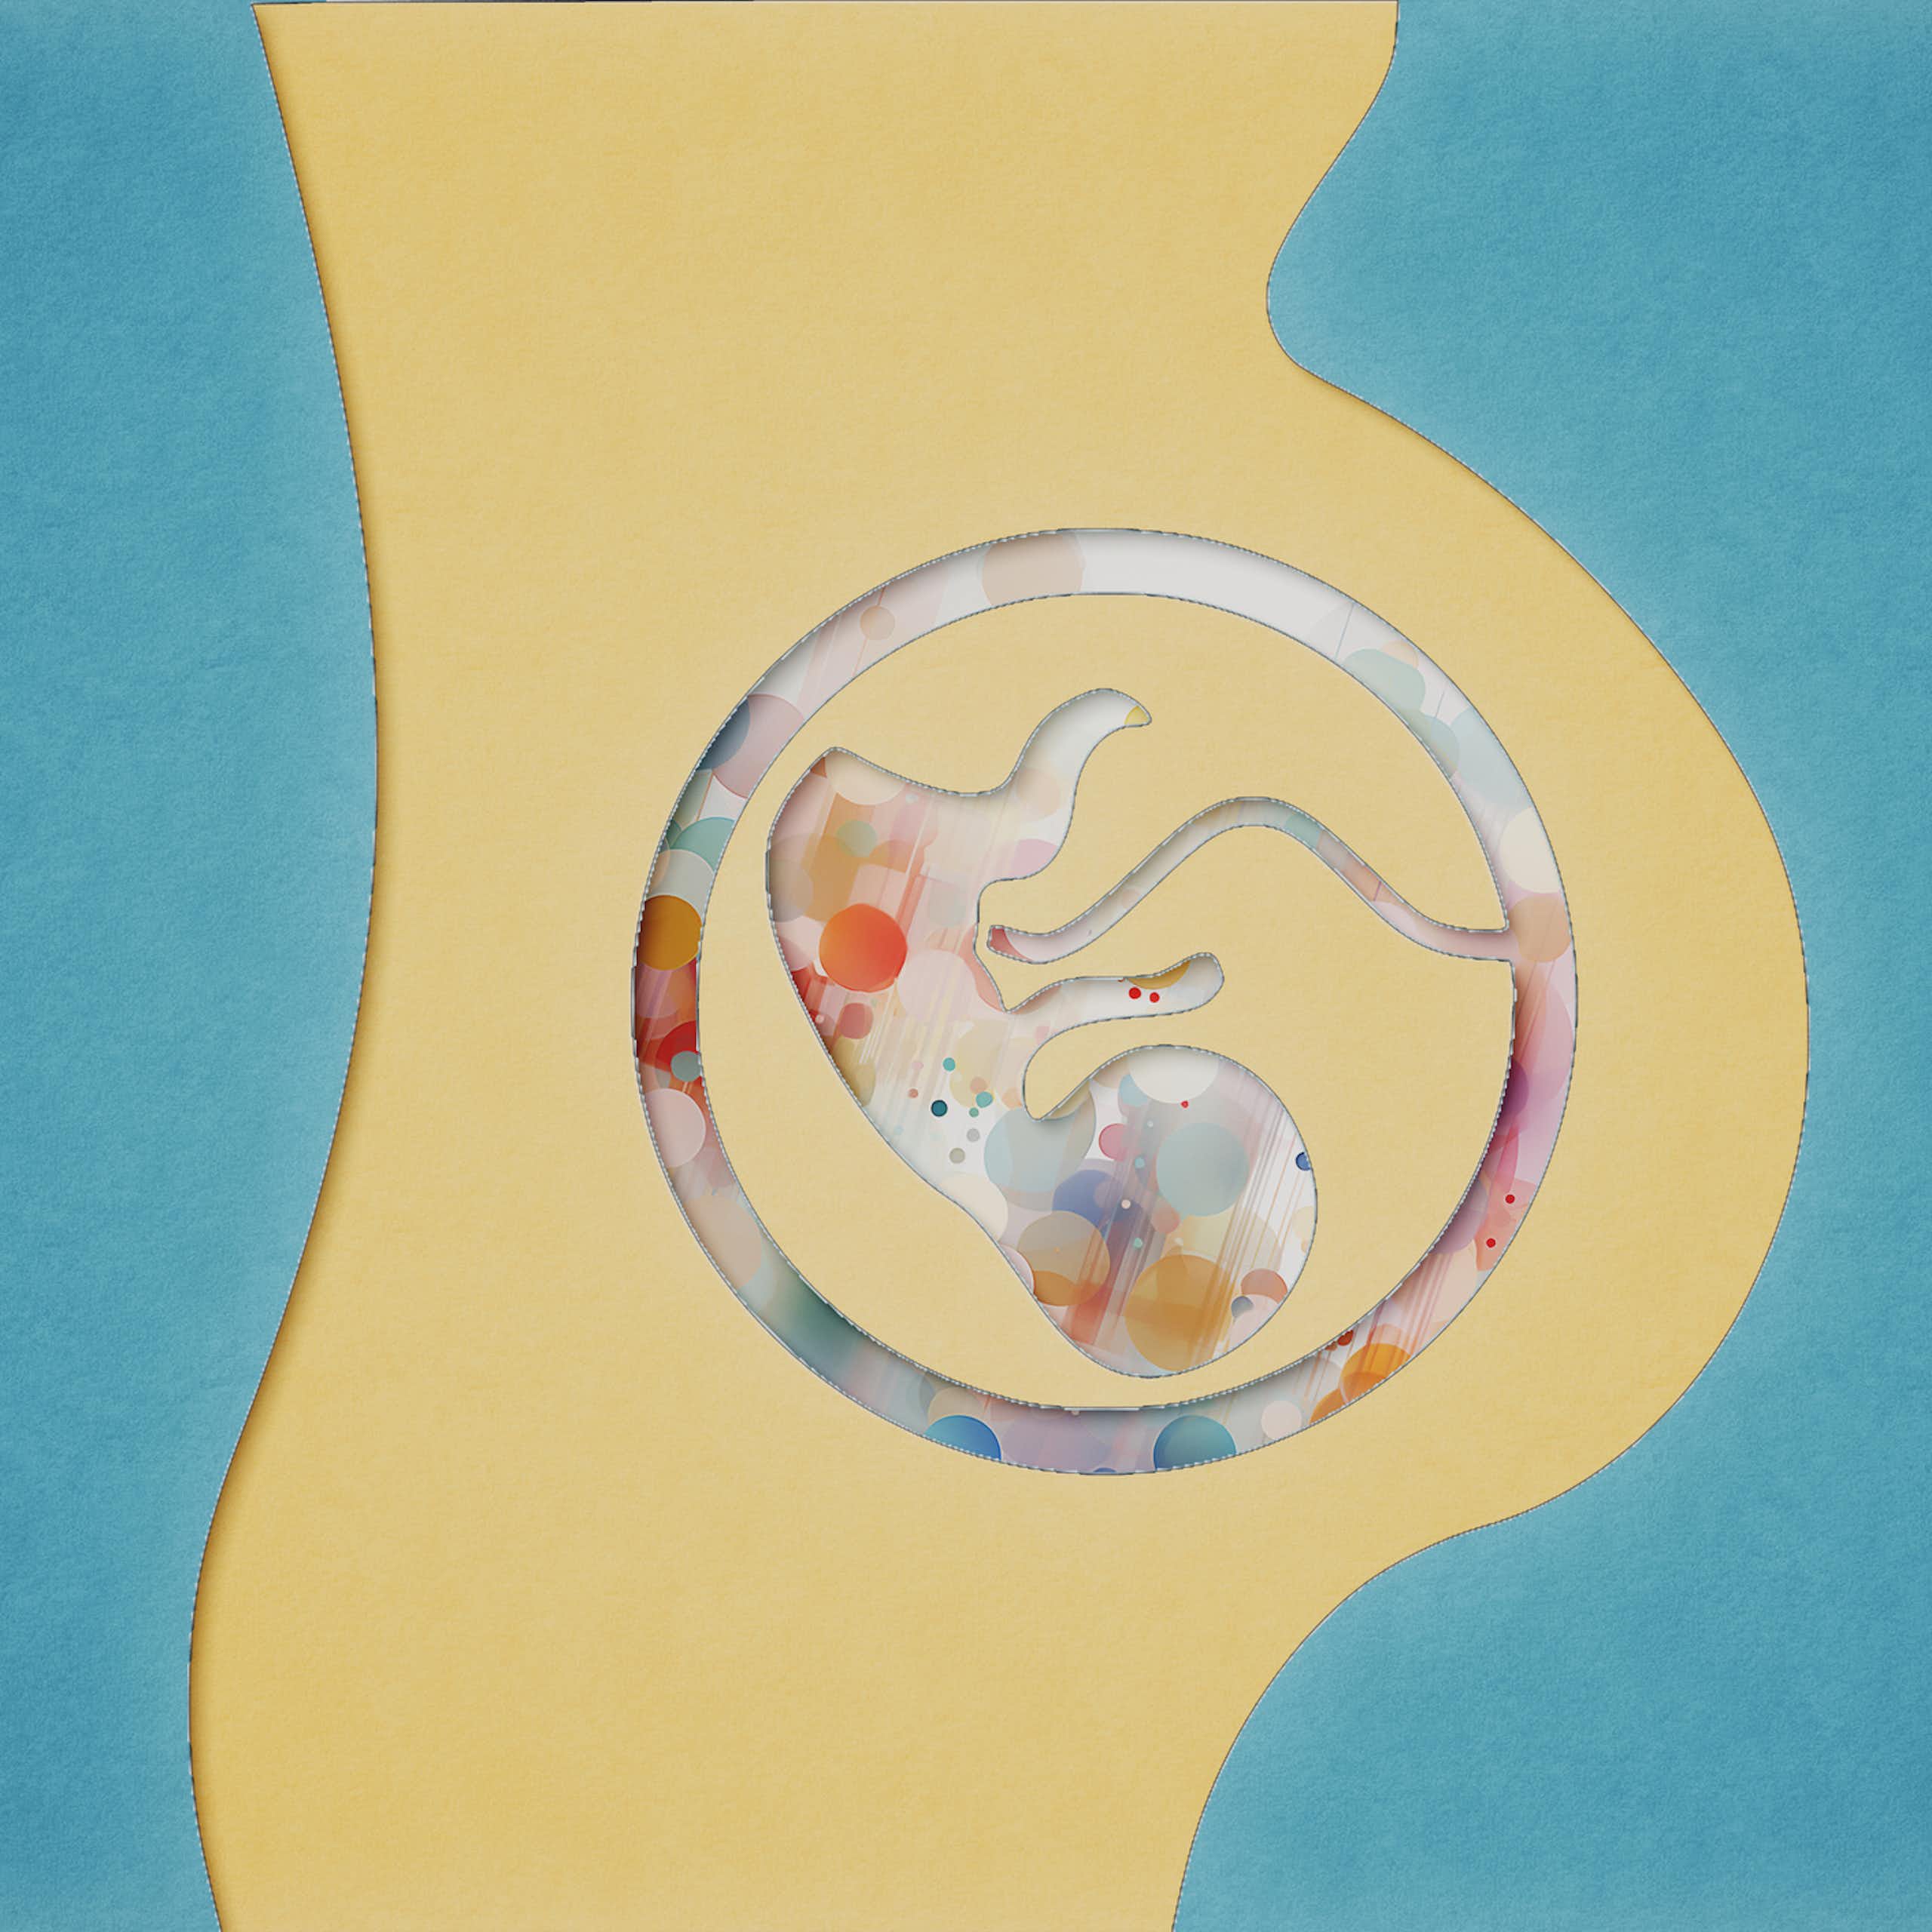 Felt vector illustration of pregnant person's silhouette with the silhouette of a fetus connected by an umbilical cord to a circle